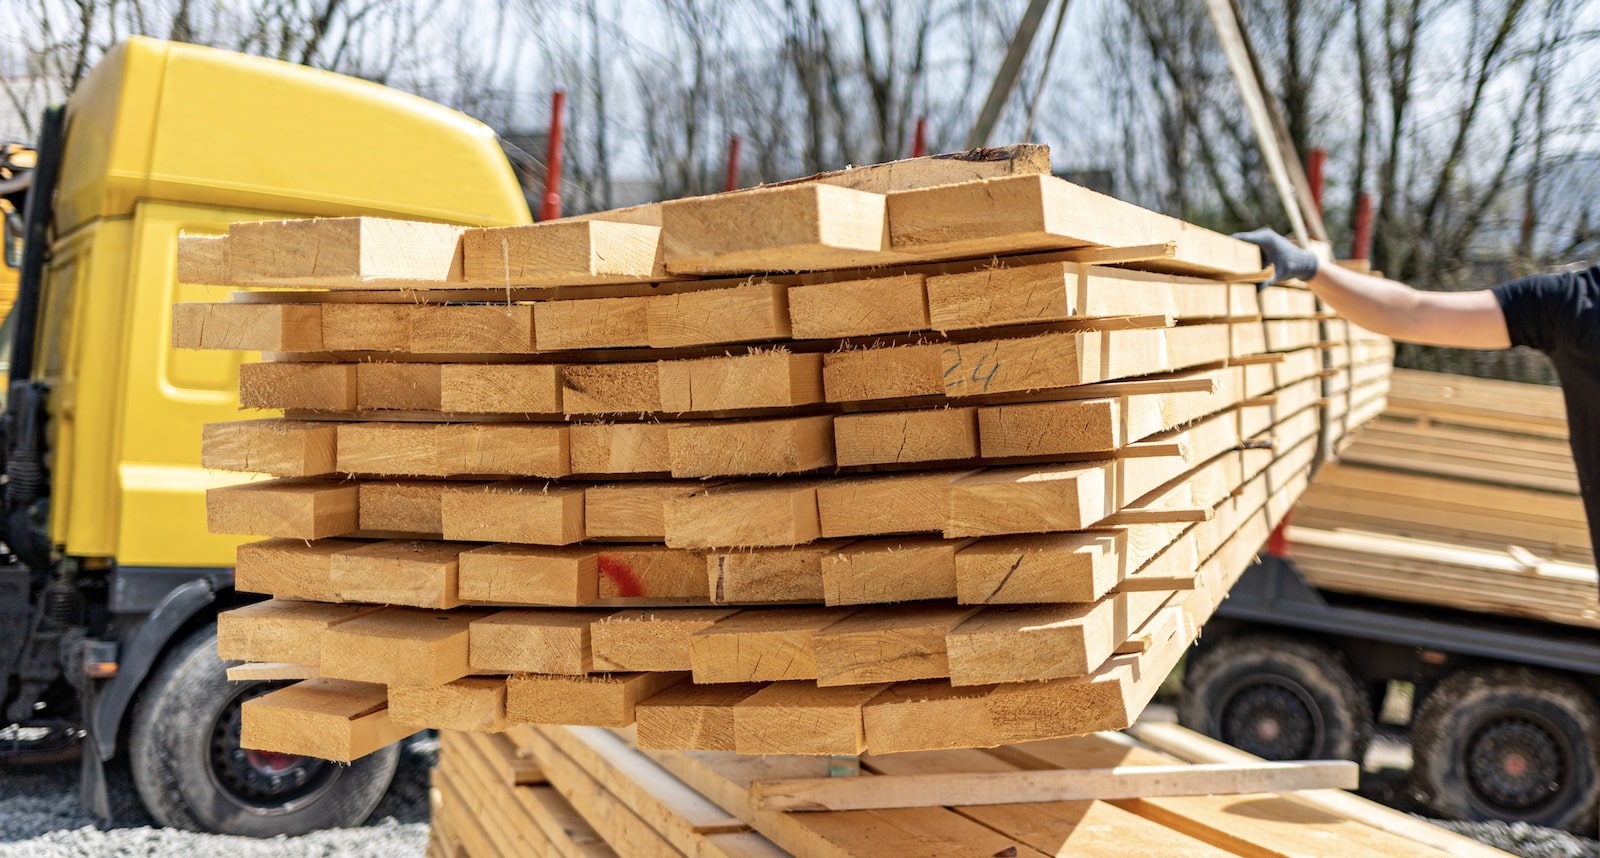 Lumber for home building